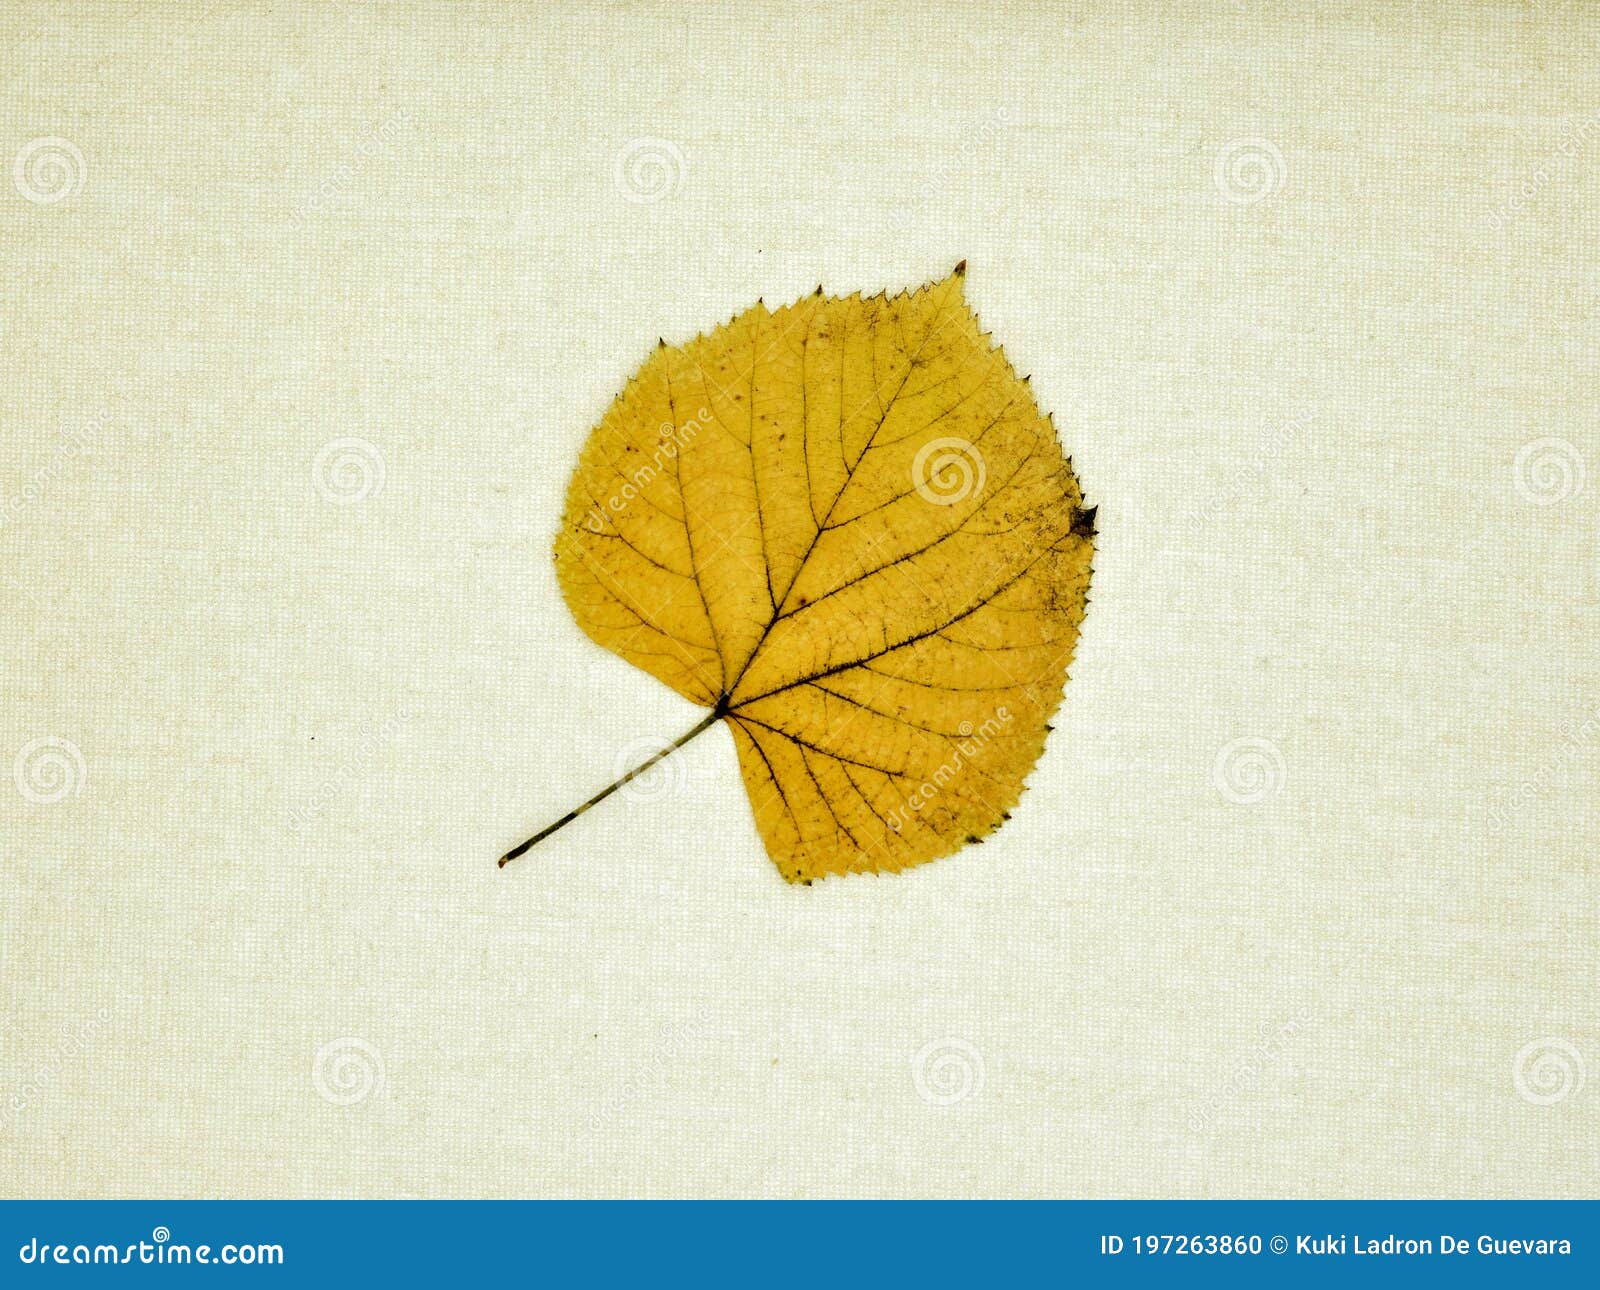 autumn leaves  on a canvas